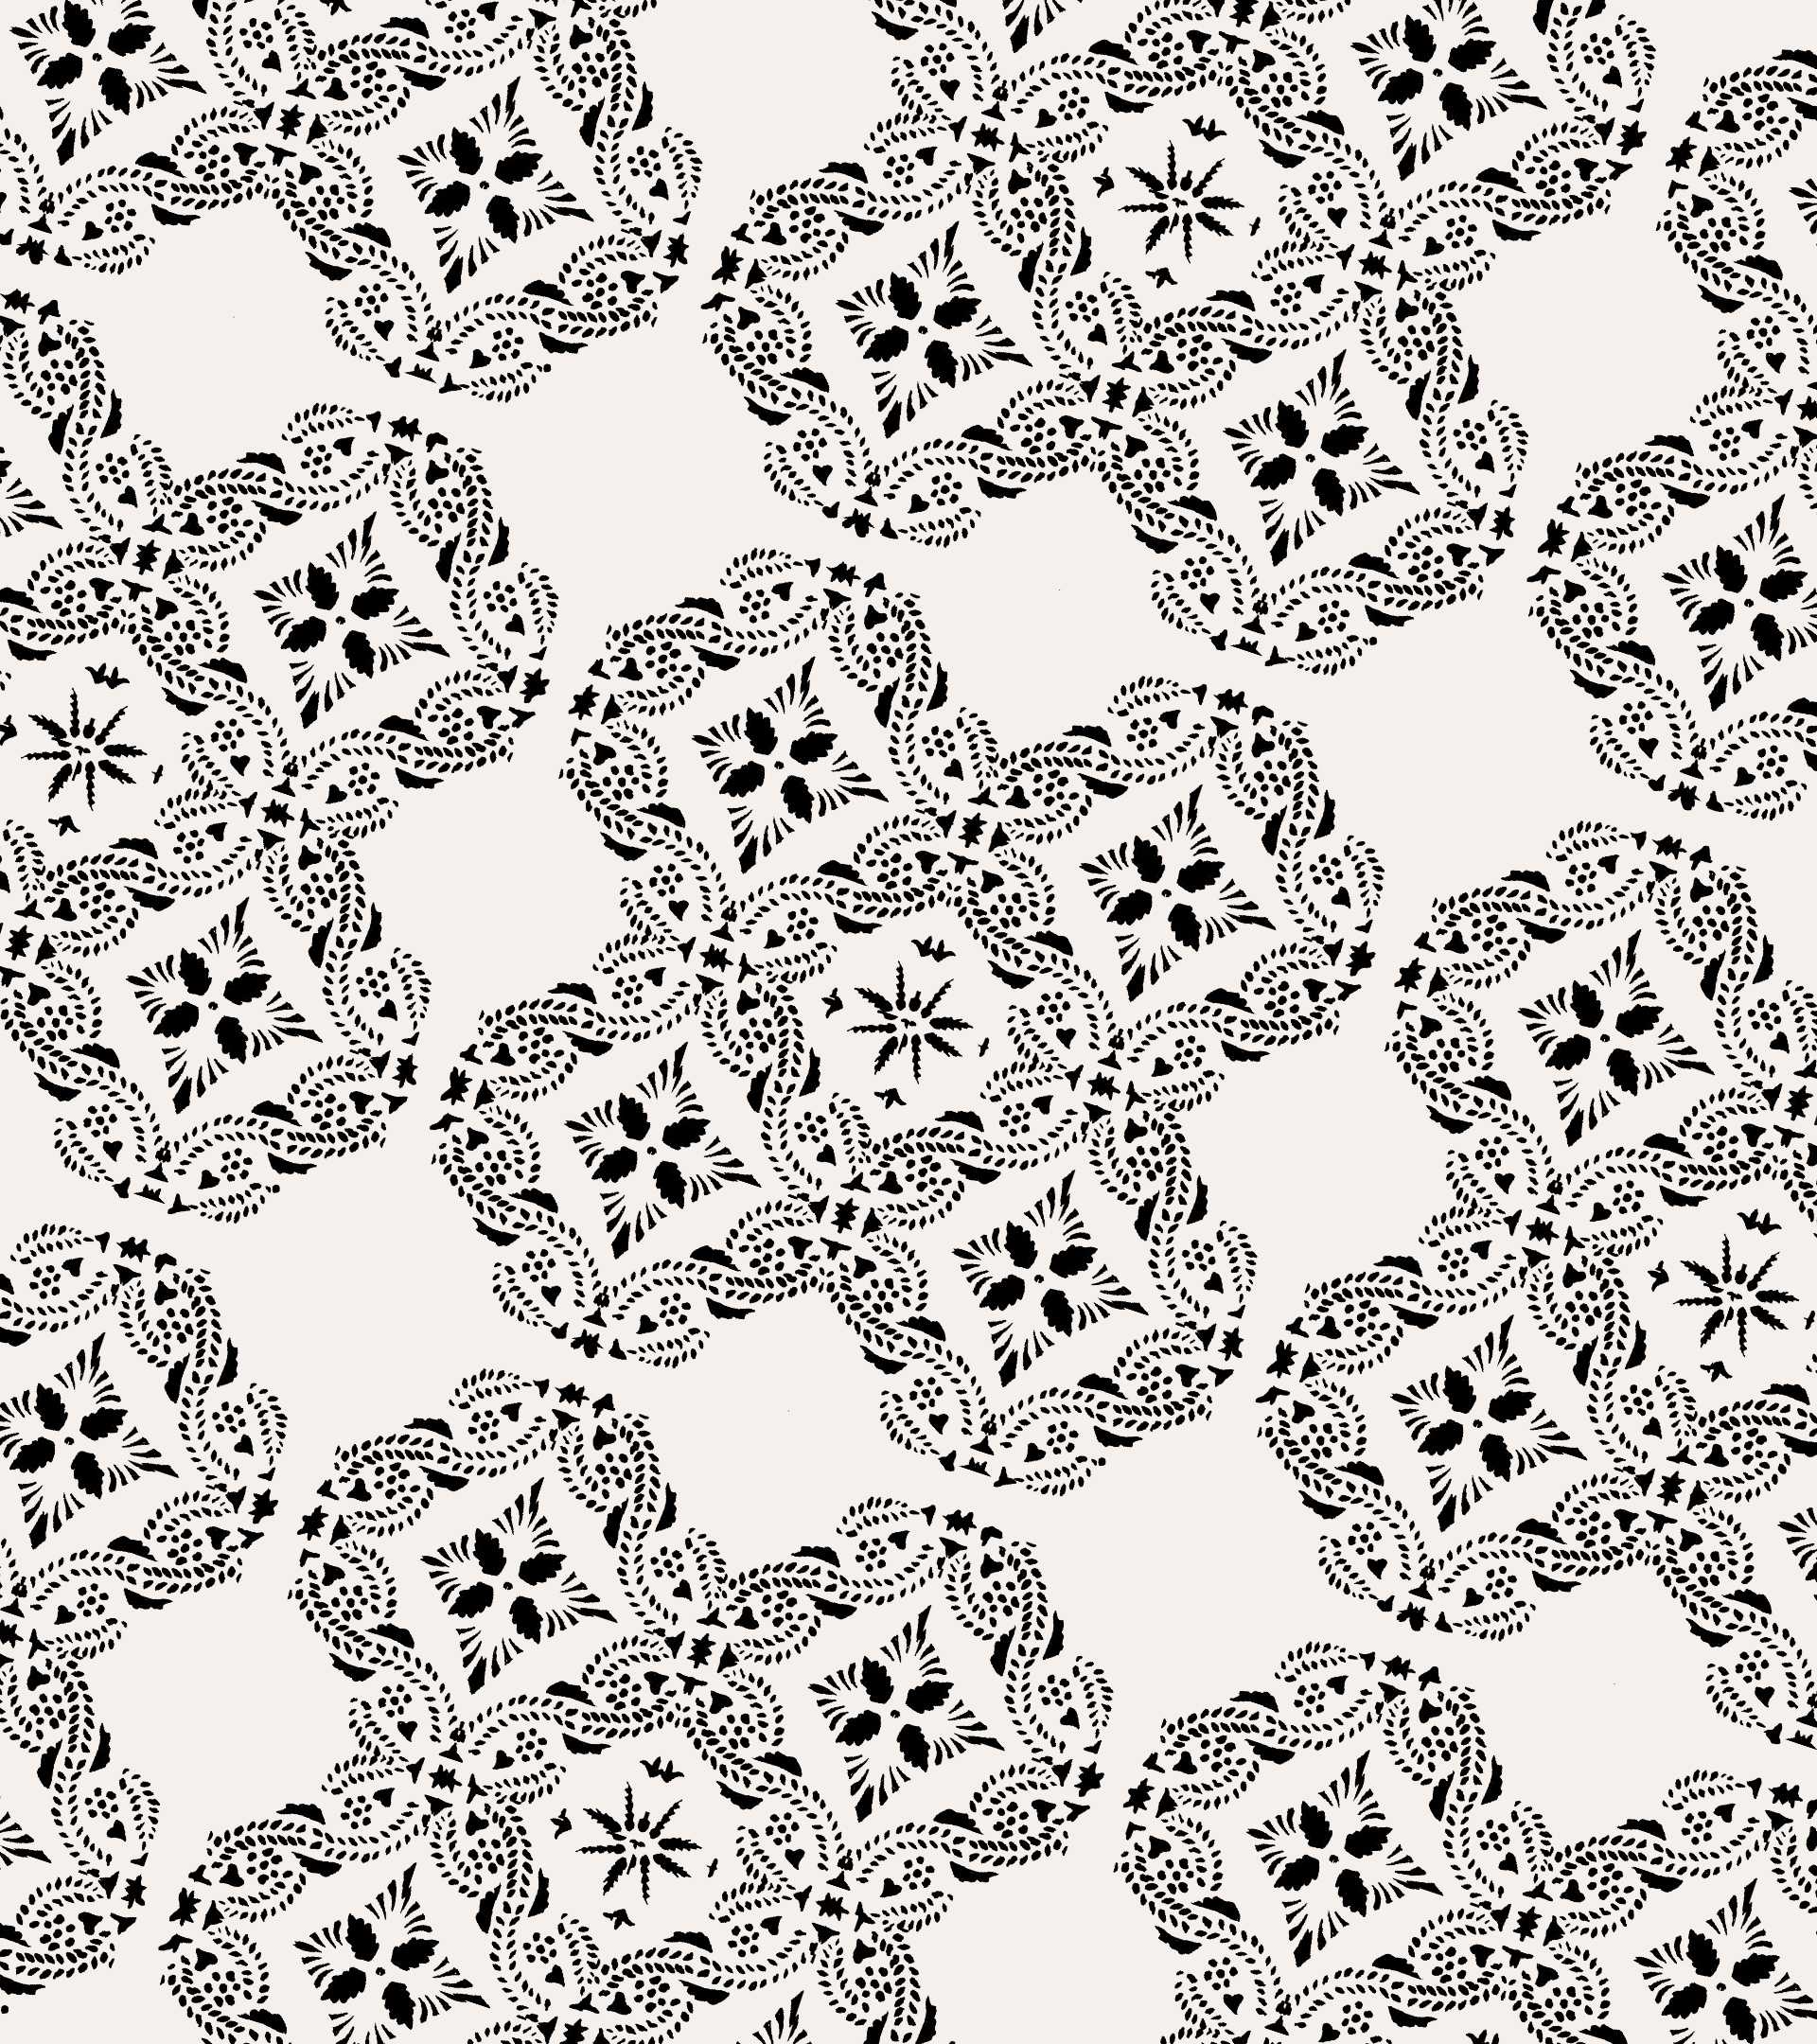 Inside pattern from book designed by Studio Poi